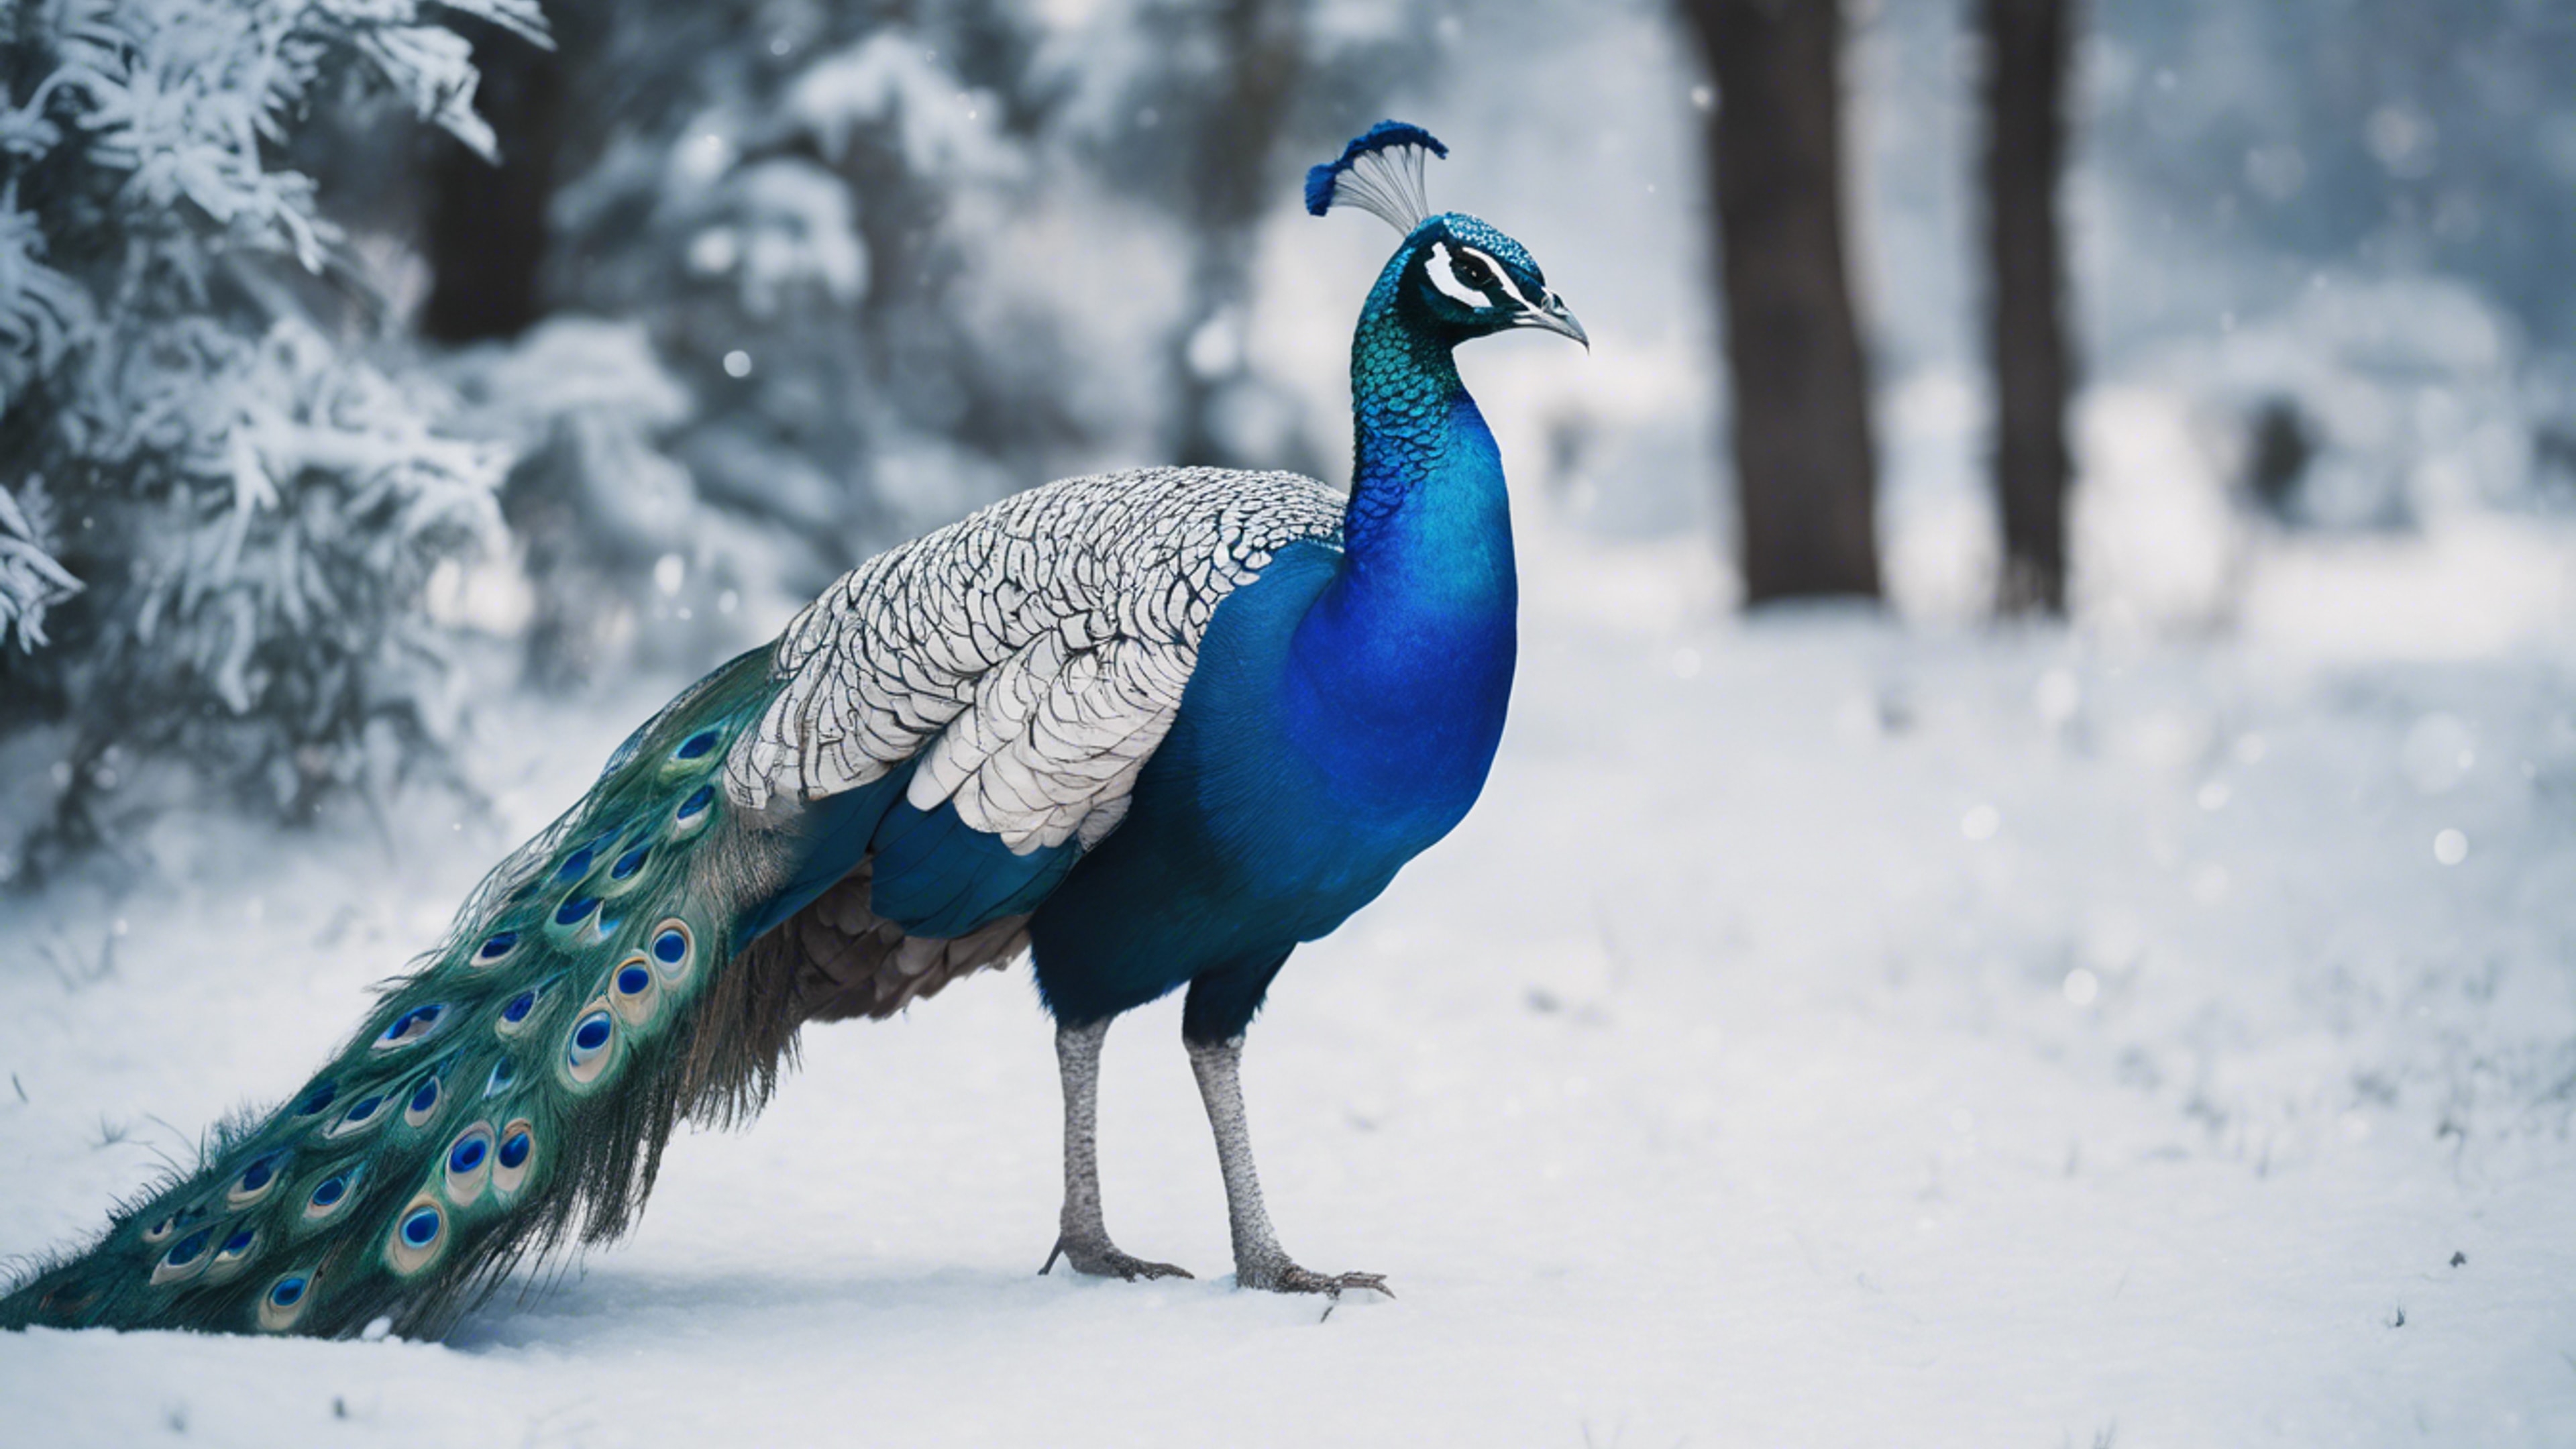 An azure blue peacock with a stunning white crest roaming in a winter wonderland. Обои[75d8e926bbf547baa433]